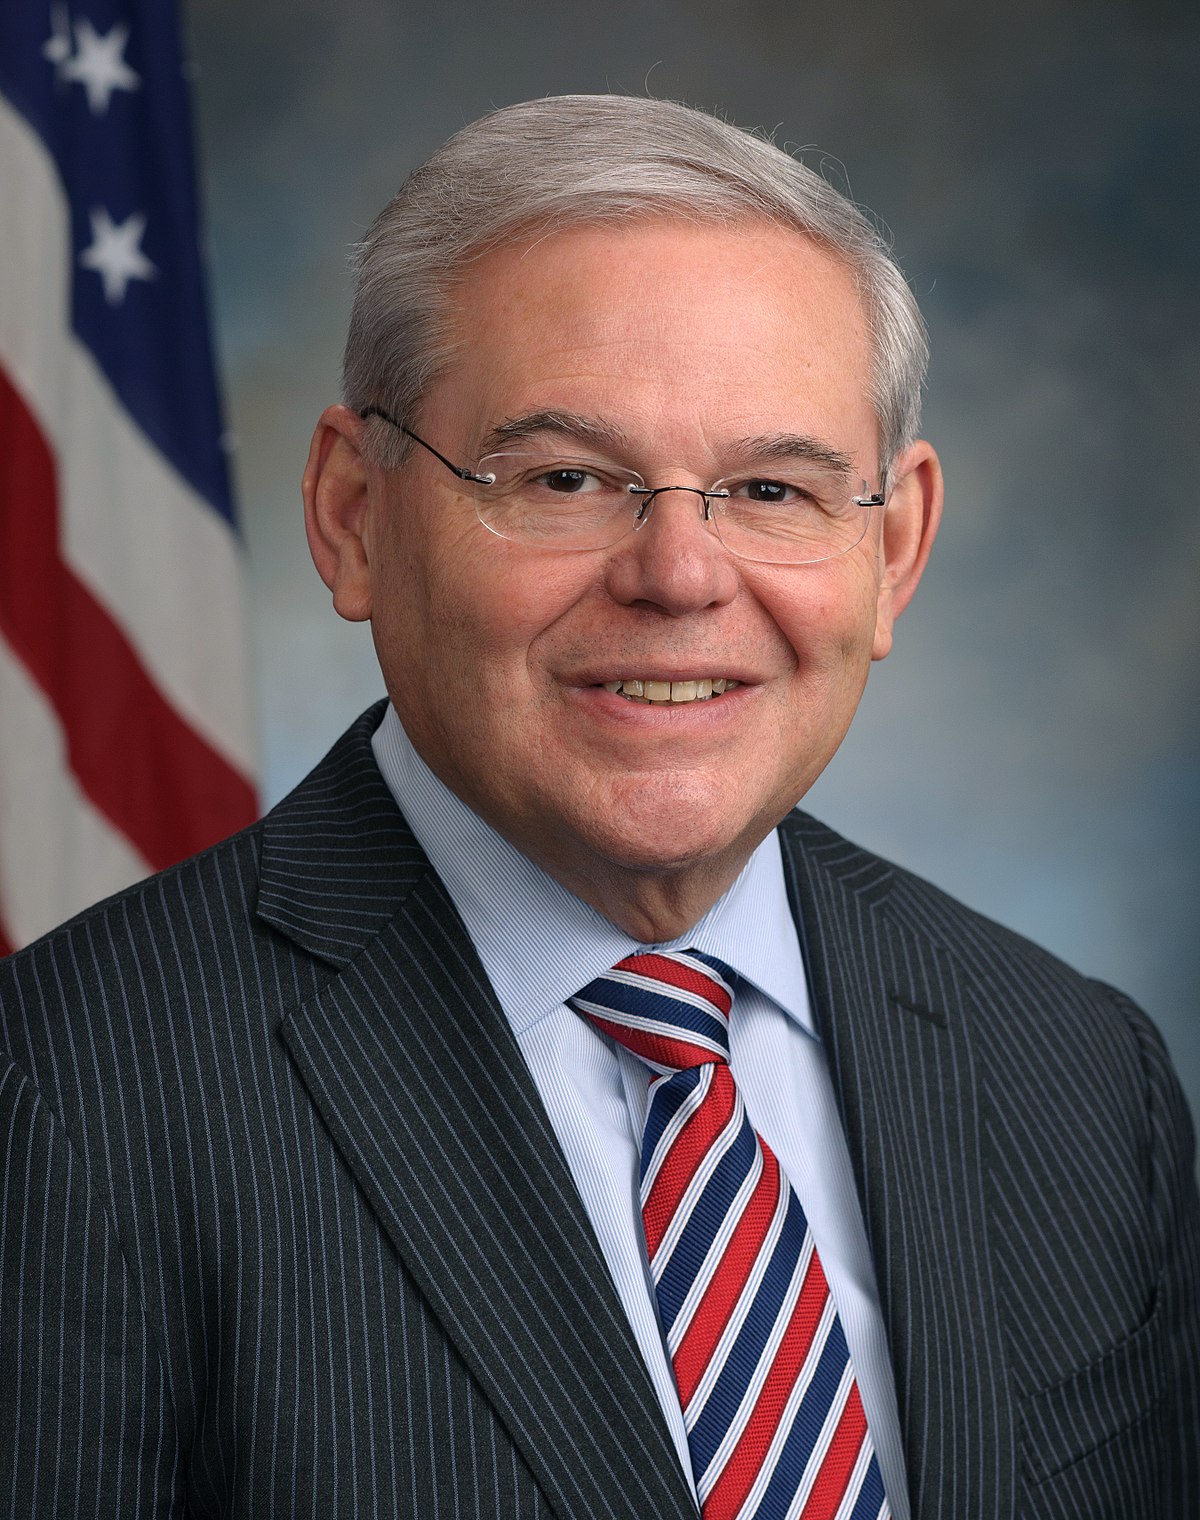 US Domestic News Roundup: US Senator Menendez rejects calls to step down from Congress; Shutdown showdown in US Congress: Time running short to fund government and more 